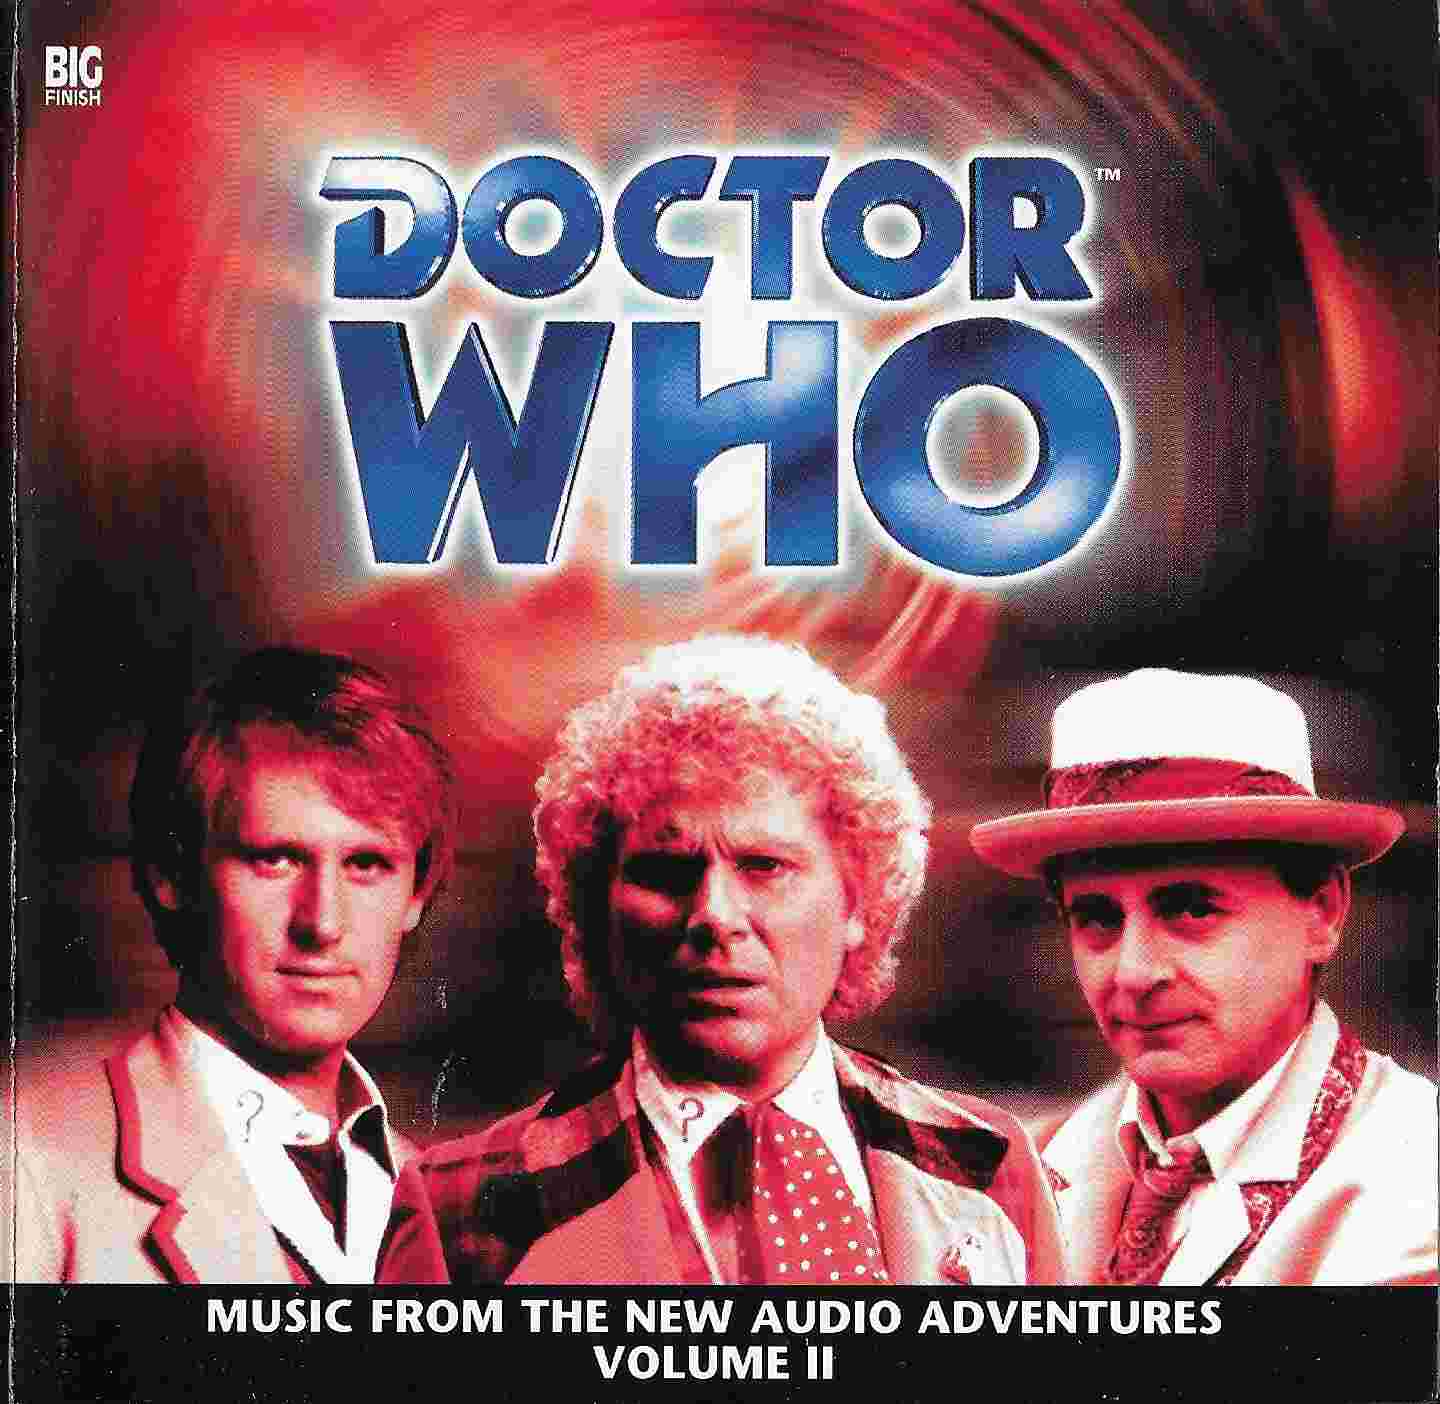 Picture of Doctor Who - Music from the new adventures - Volume 2 by artist Various from the BBC cds - Records and Tapes library